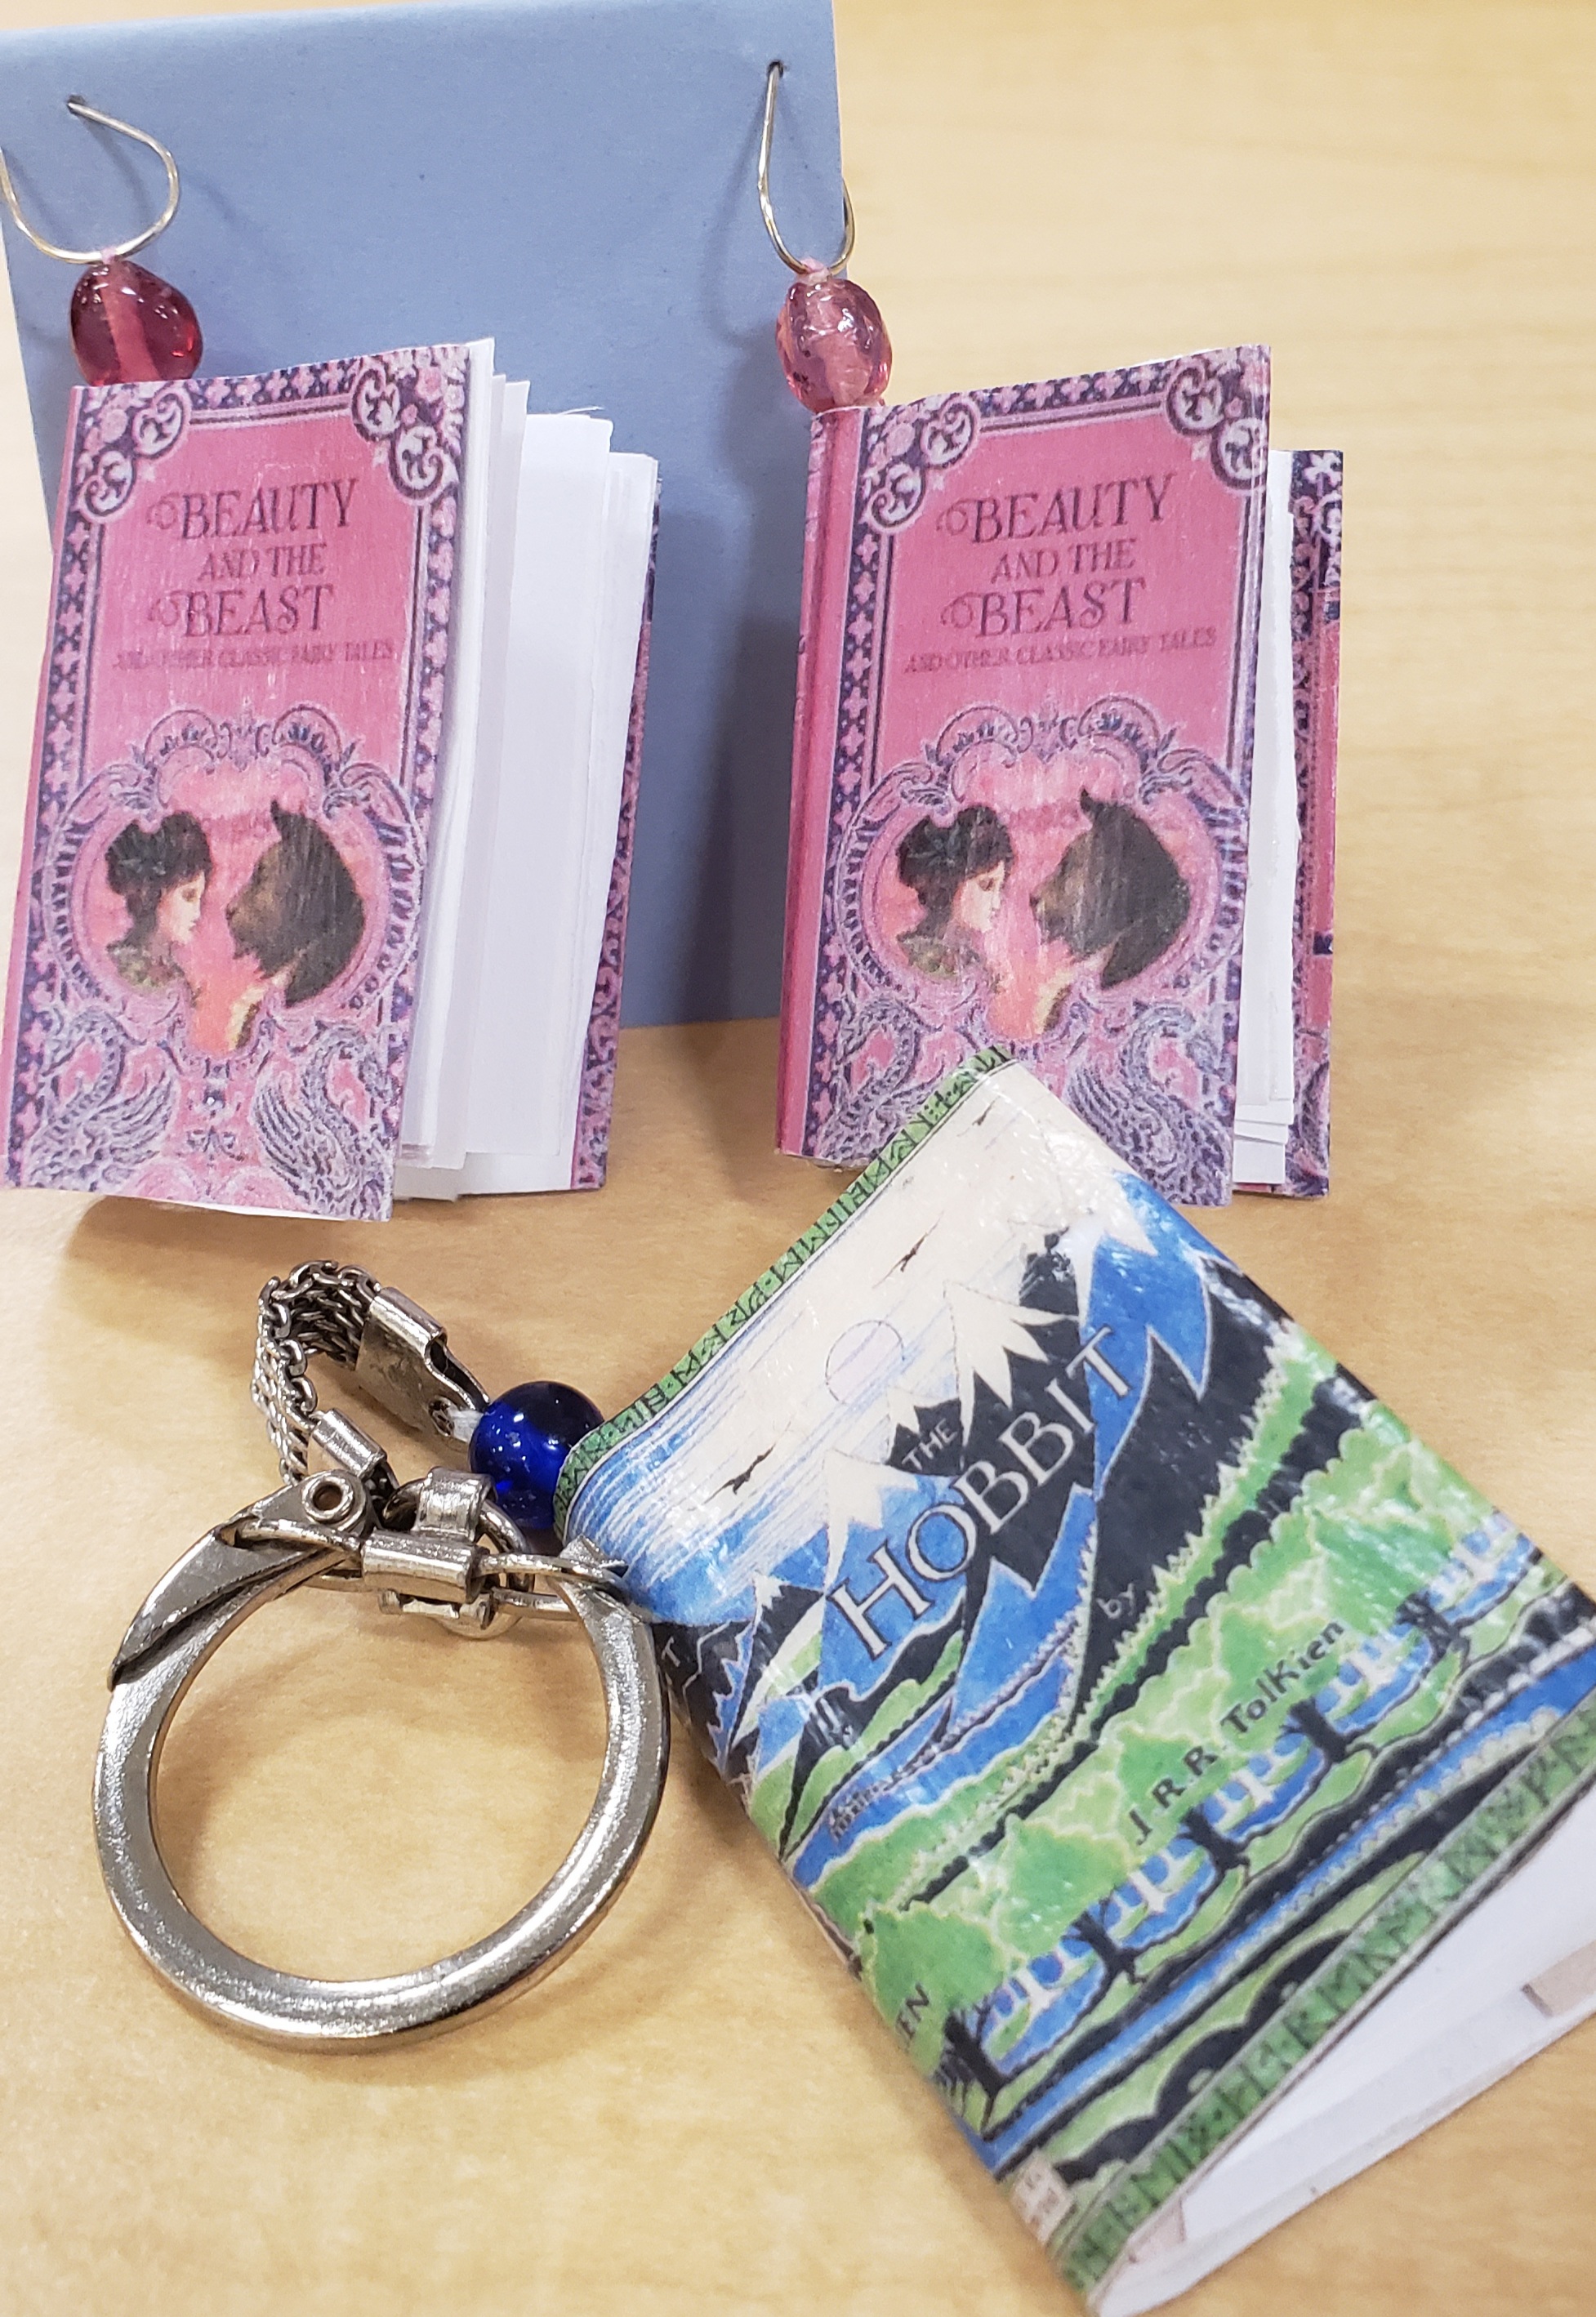 "Beauty and the Beast" book earrings and a "The Hobbit" book keychain